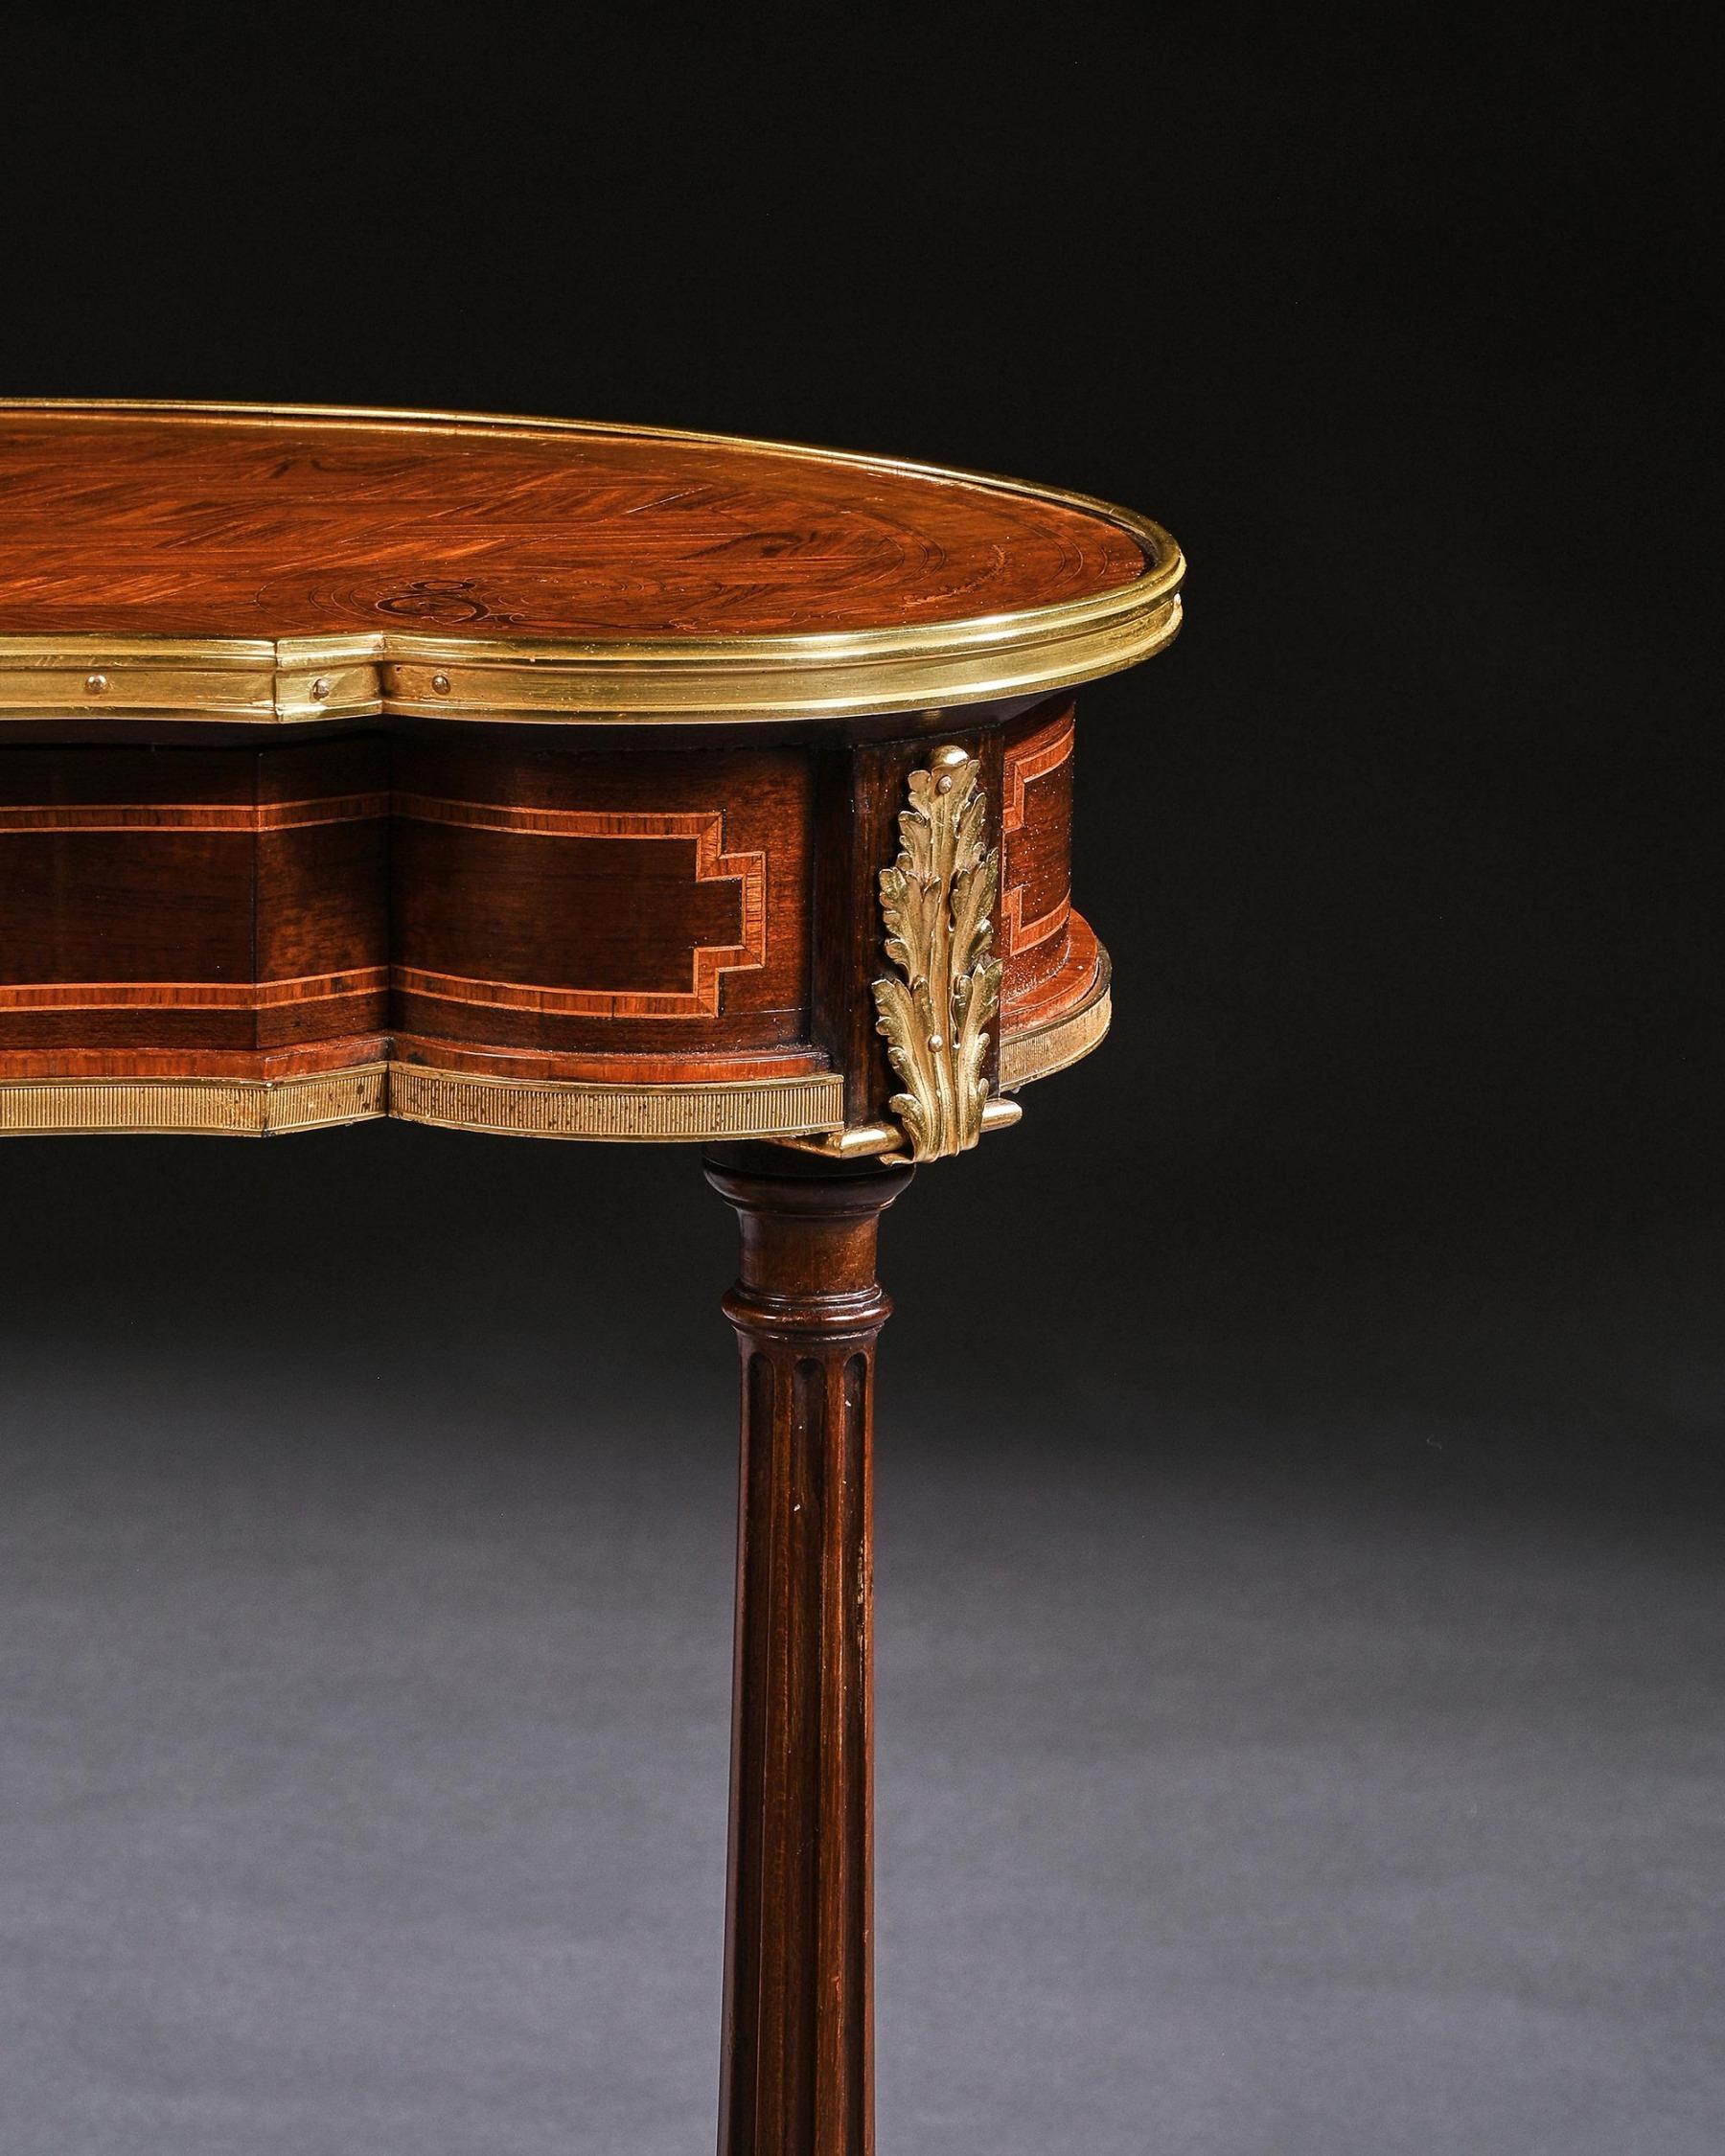 Fine 19th Century Gillows Parquetry and Gilt Bronze Kidney Shaped Table For Sale 3